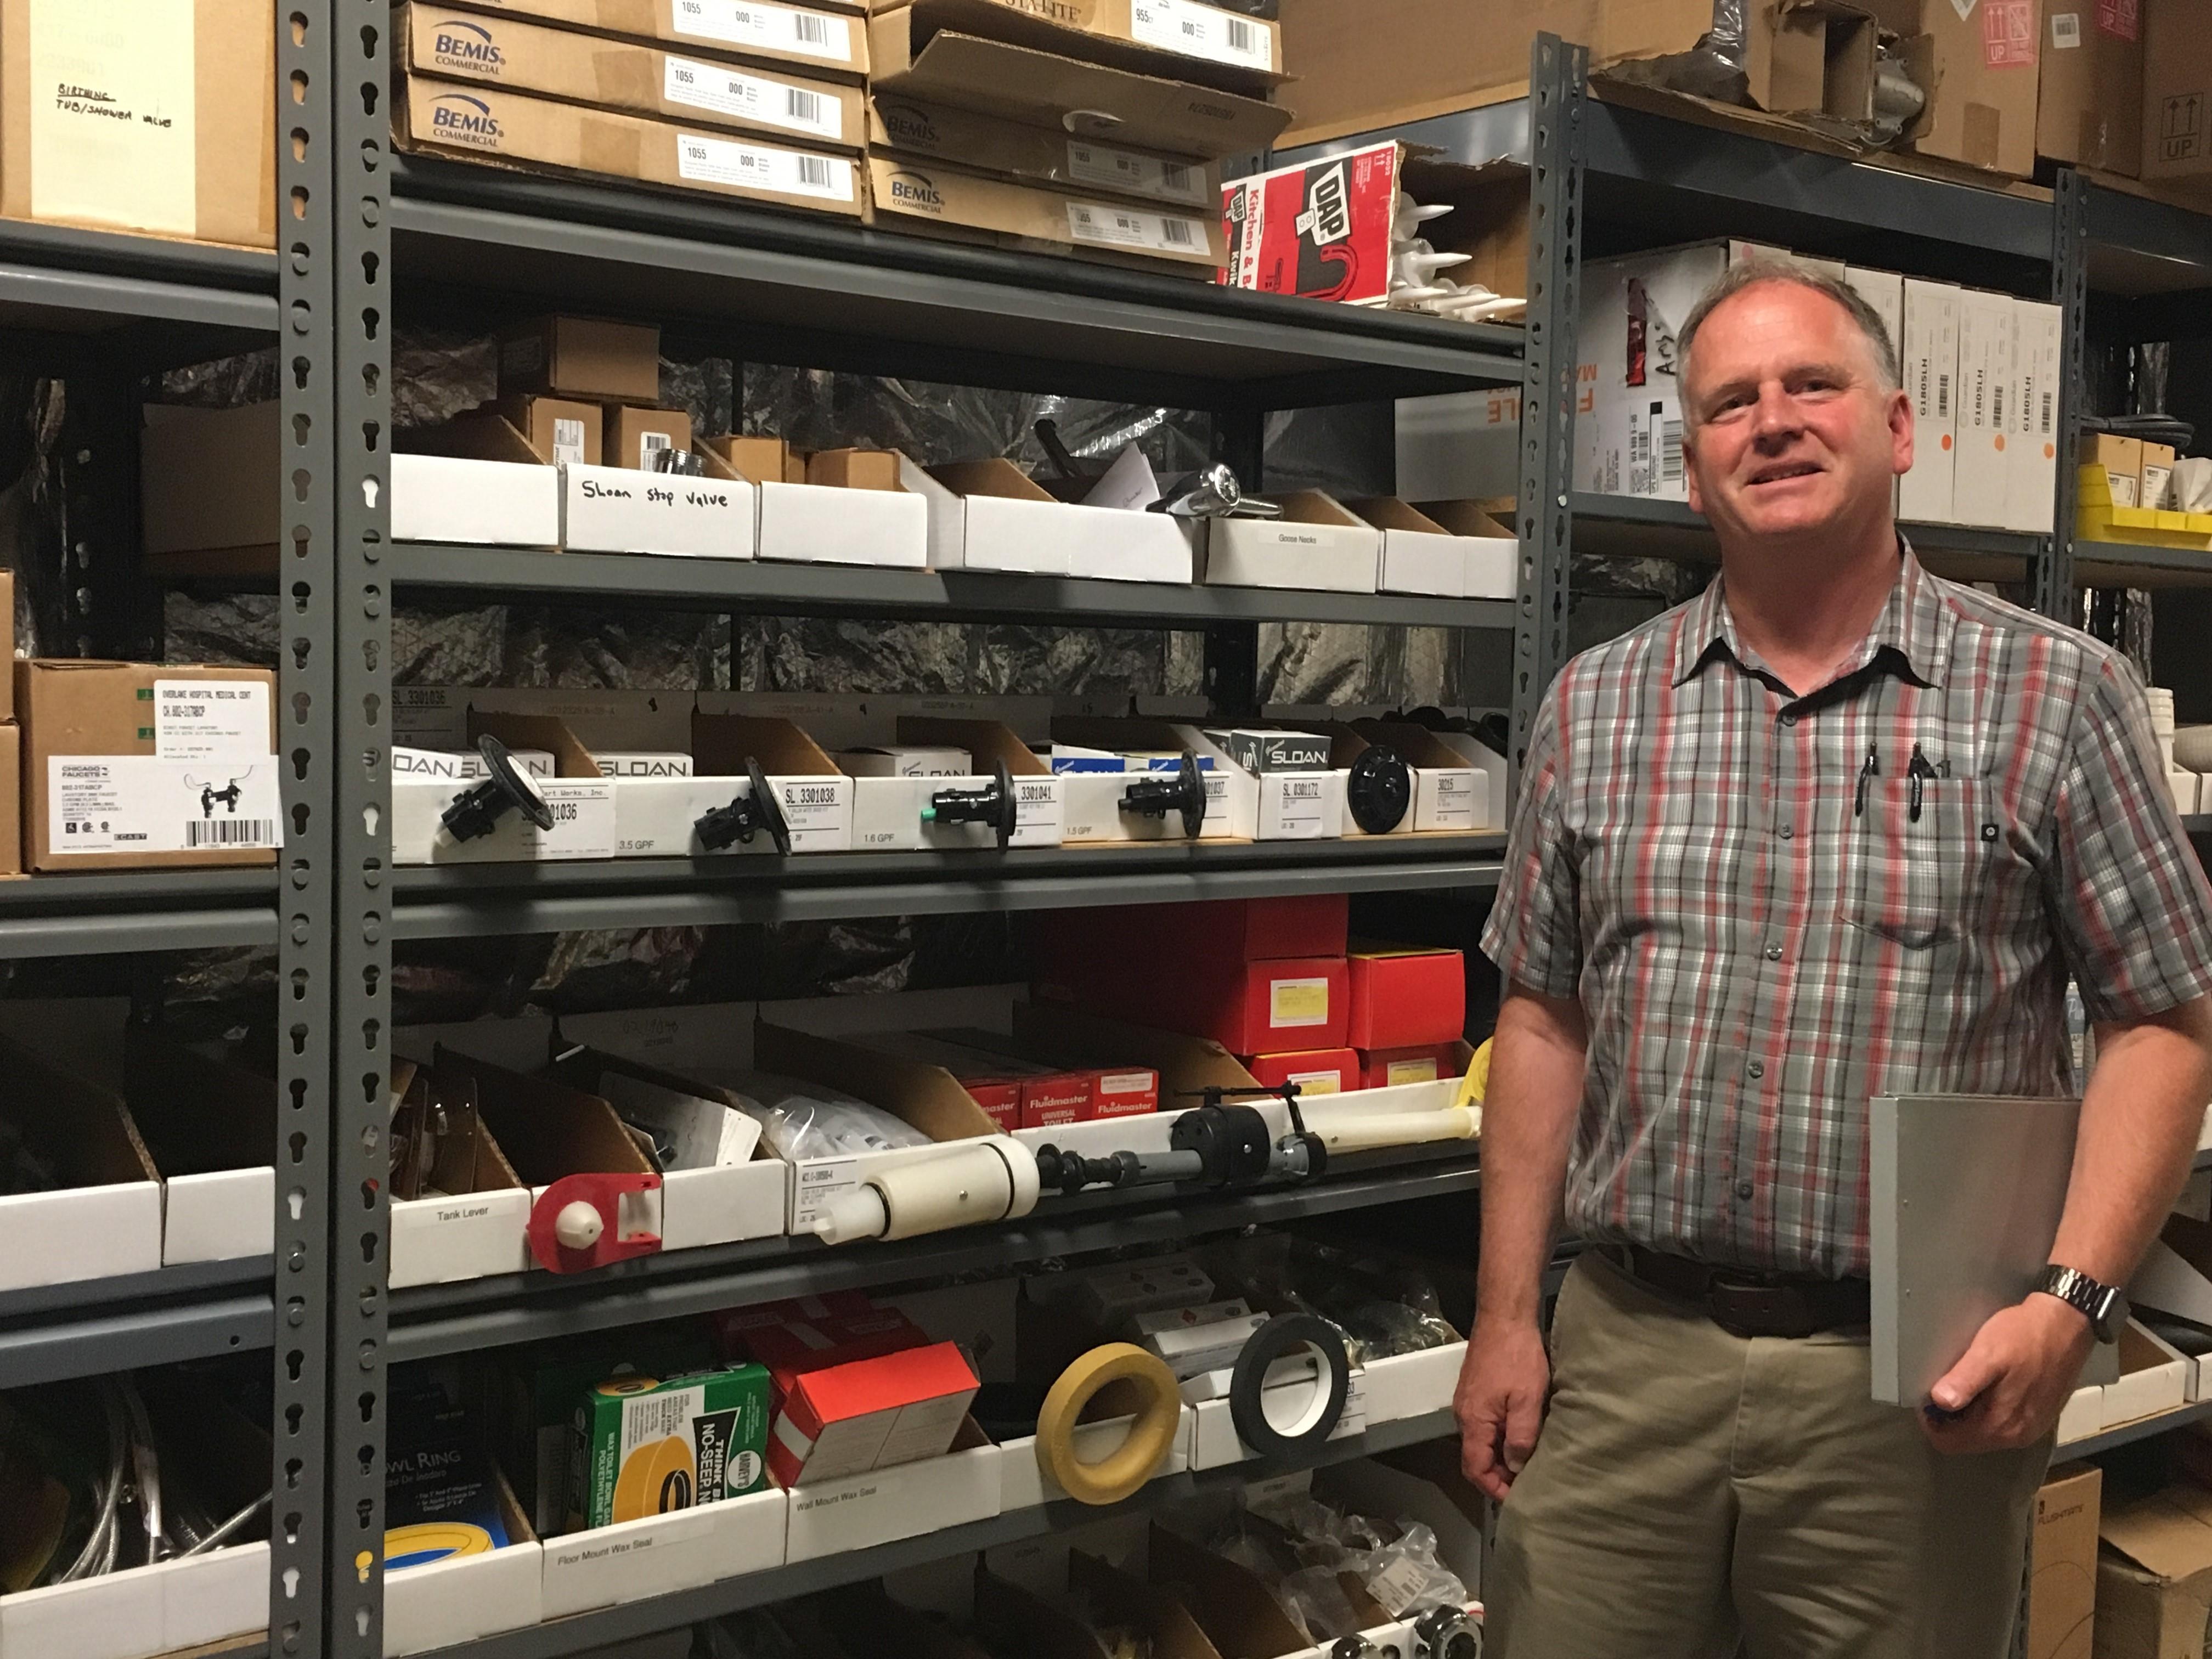 Chris showing one of The Part Work’s Vendor-Maintained Inventory shelves.